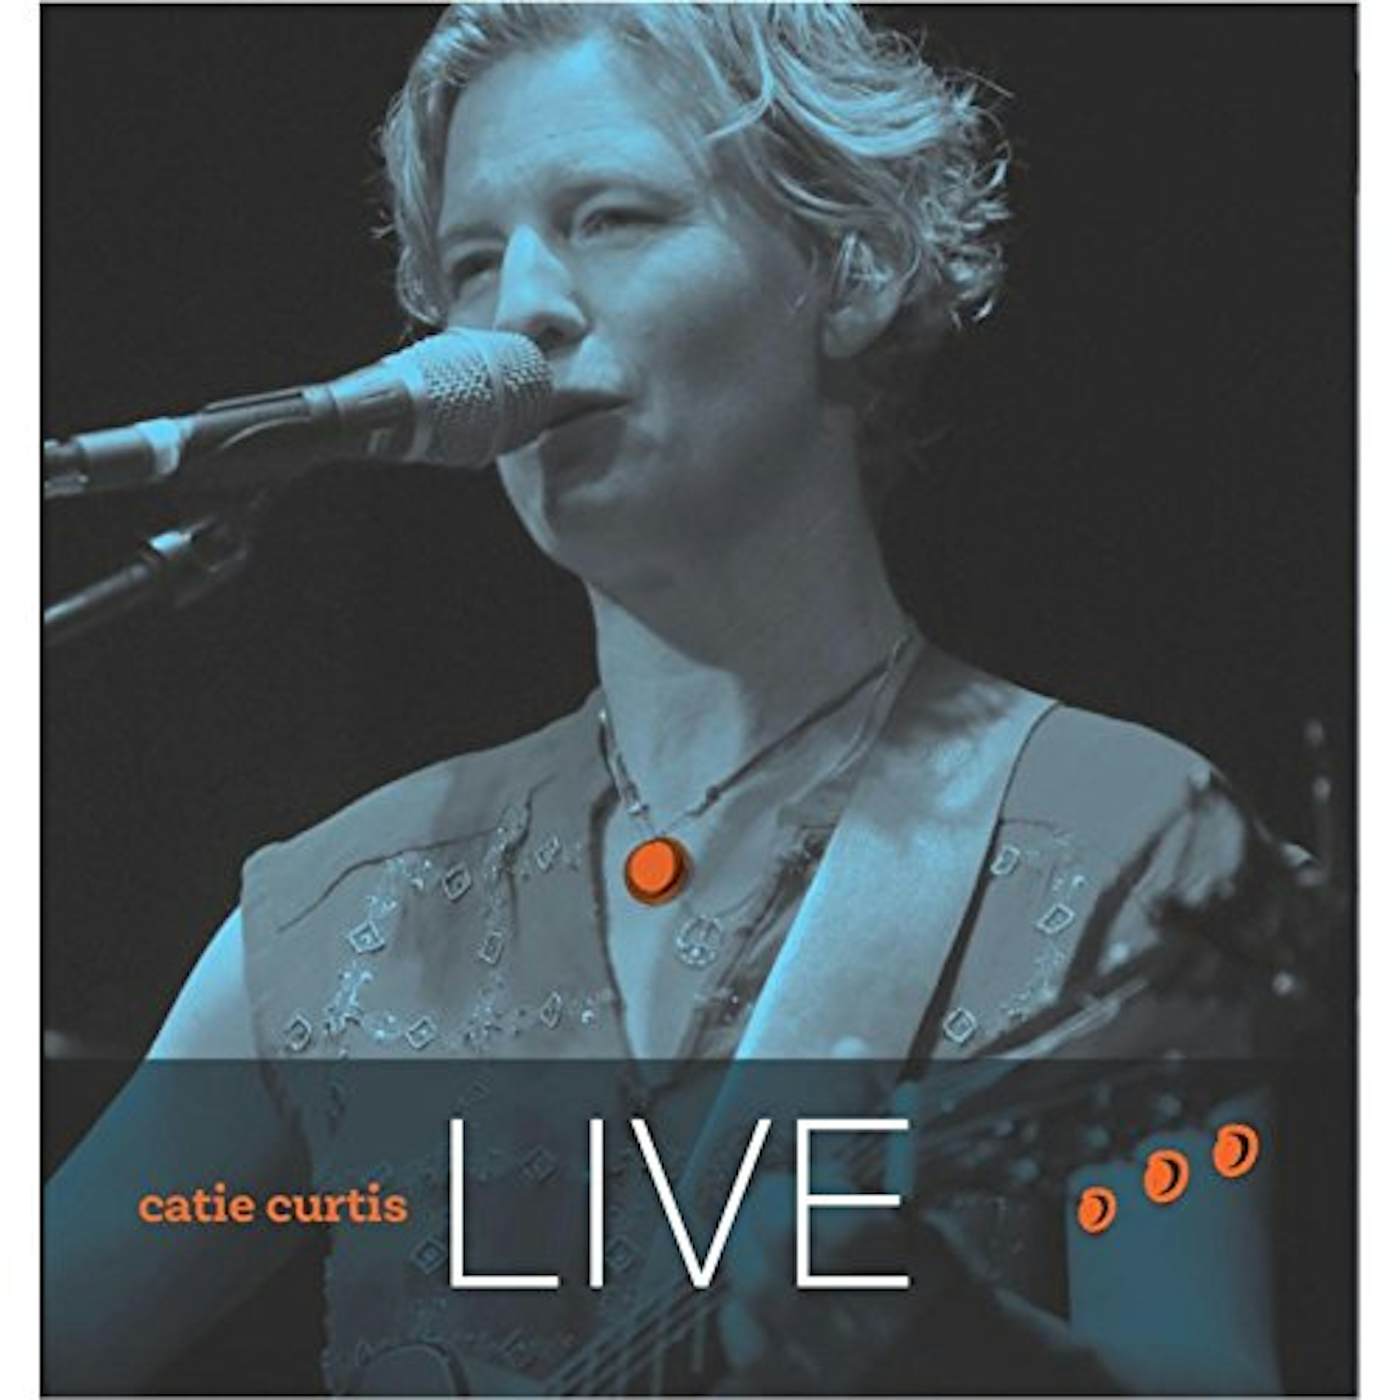 CATIE CURTIS LIVE CD